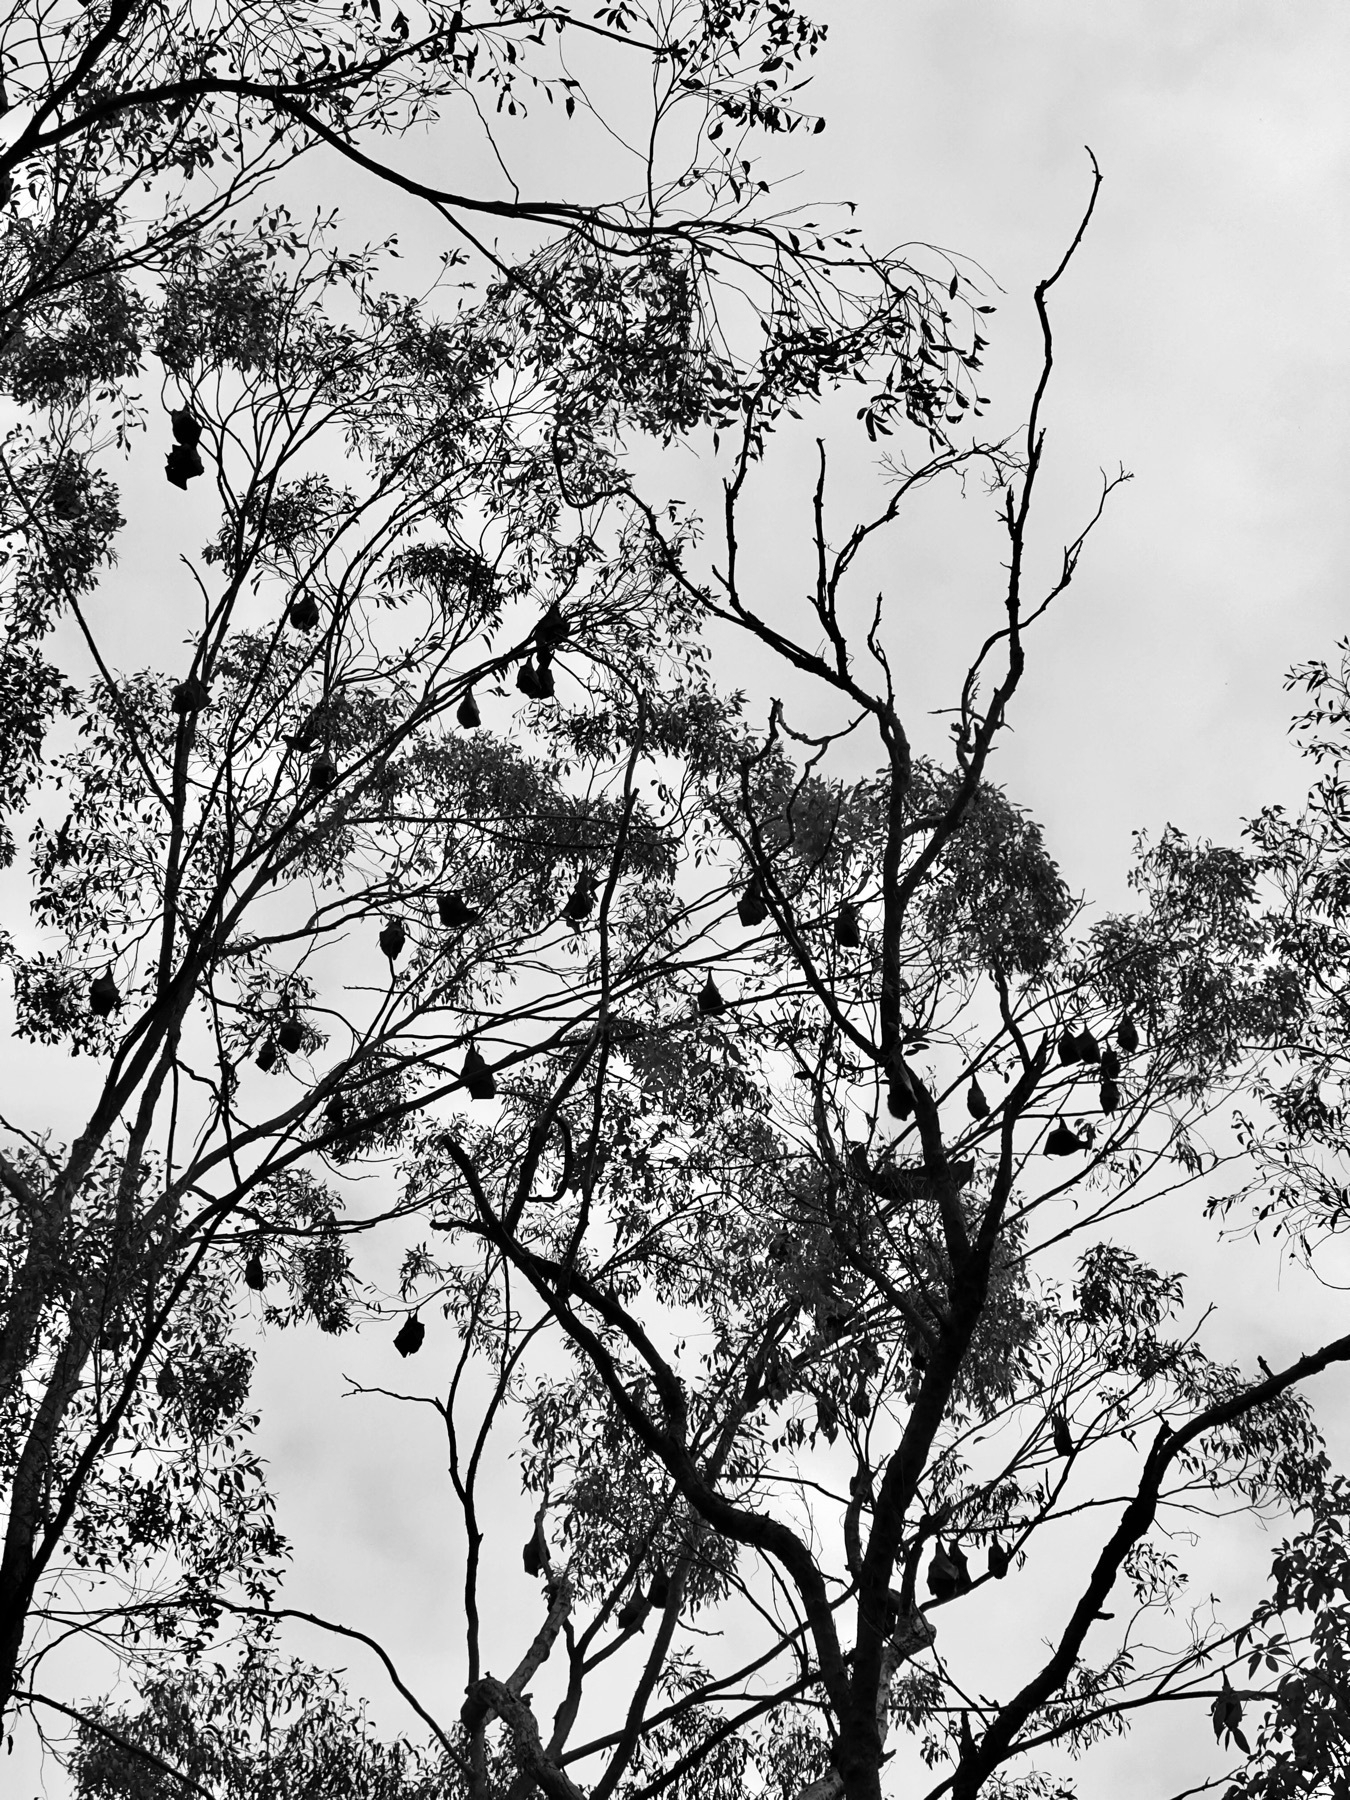 Gumtrees against a cloudy sky, the bright daylight casting the scene as if it were black and white. Dotted throughout the trees a colony of flying foxes.